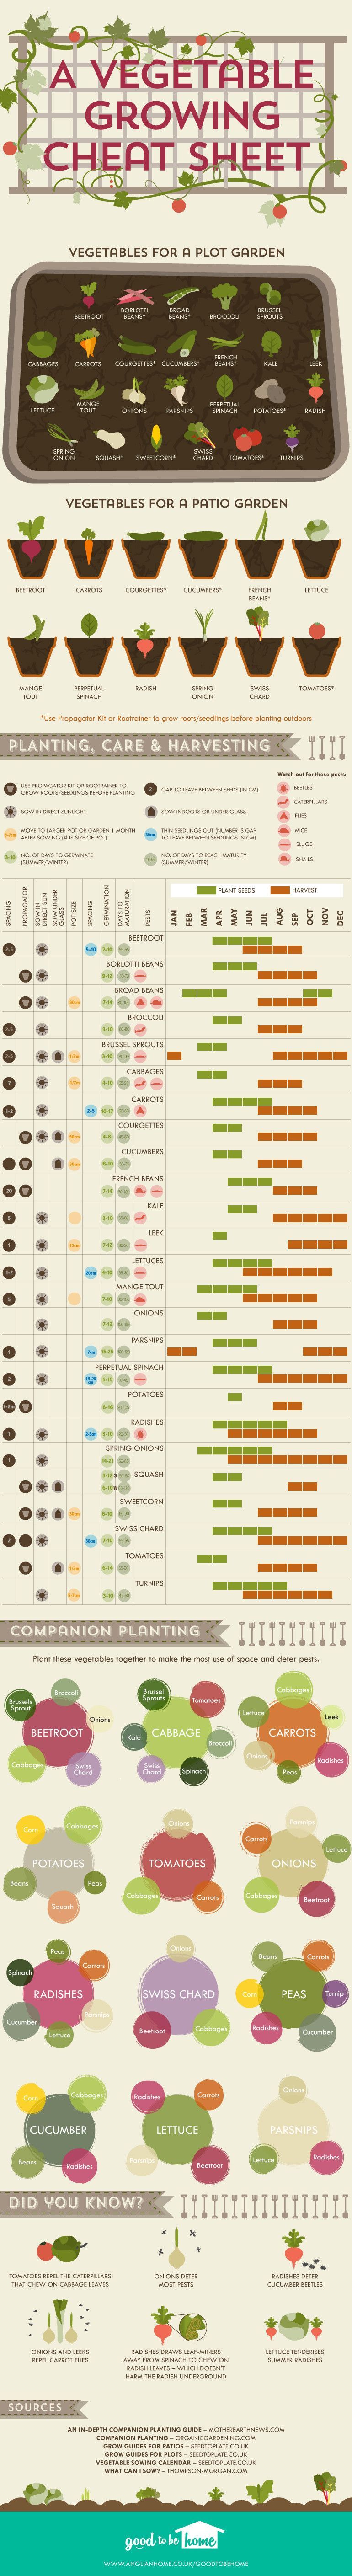 This Genius Cheat Sheet For Gardeners Tells Where And When To Plant Your Vegetables